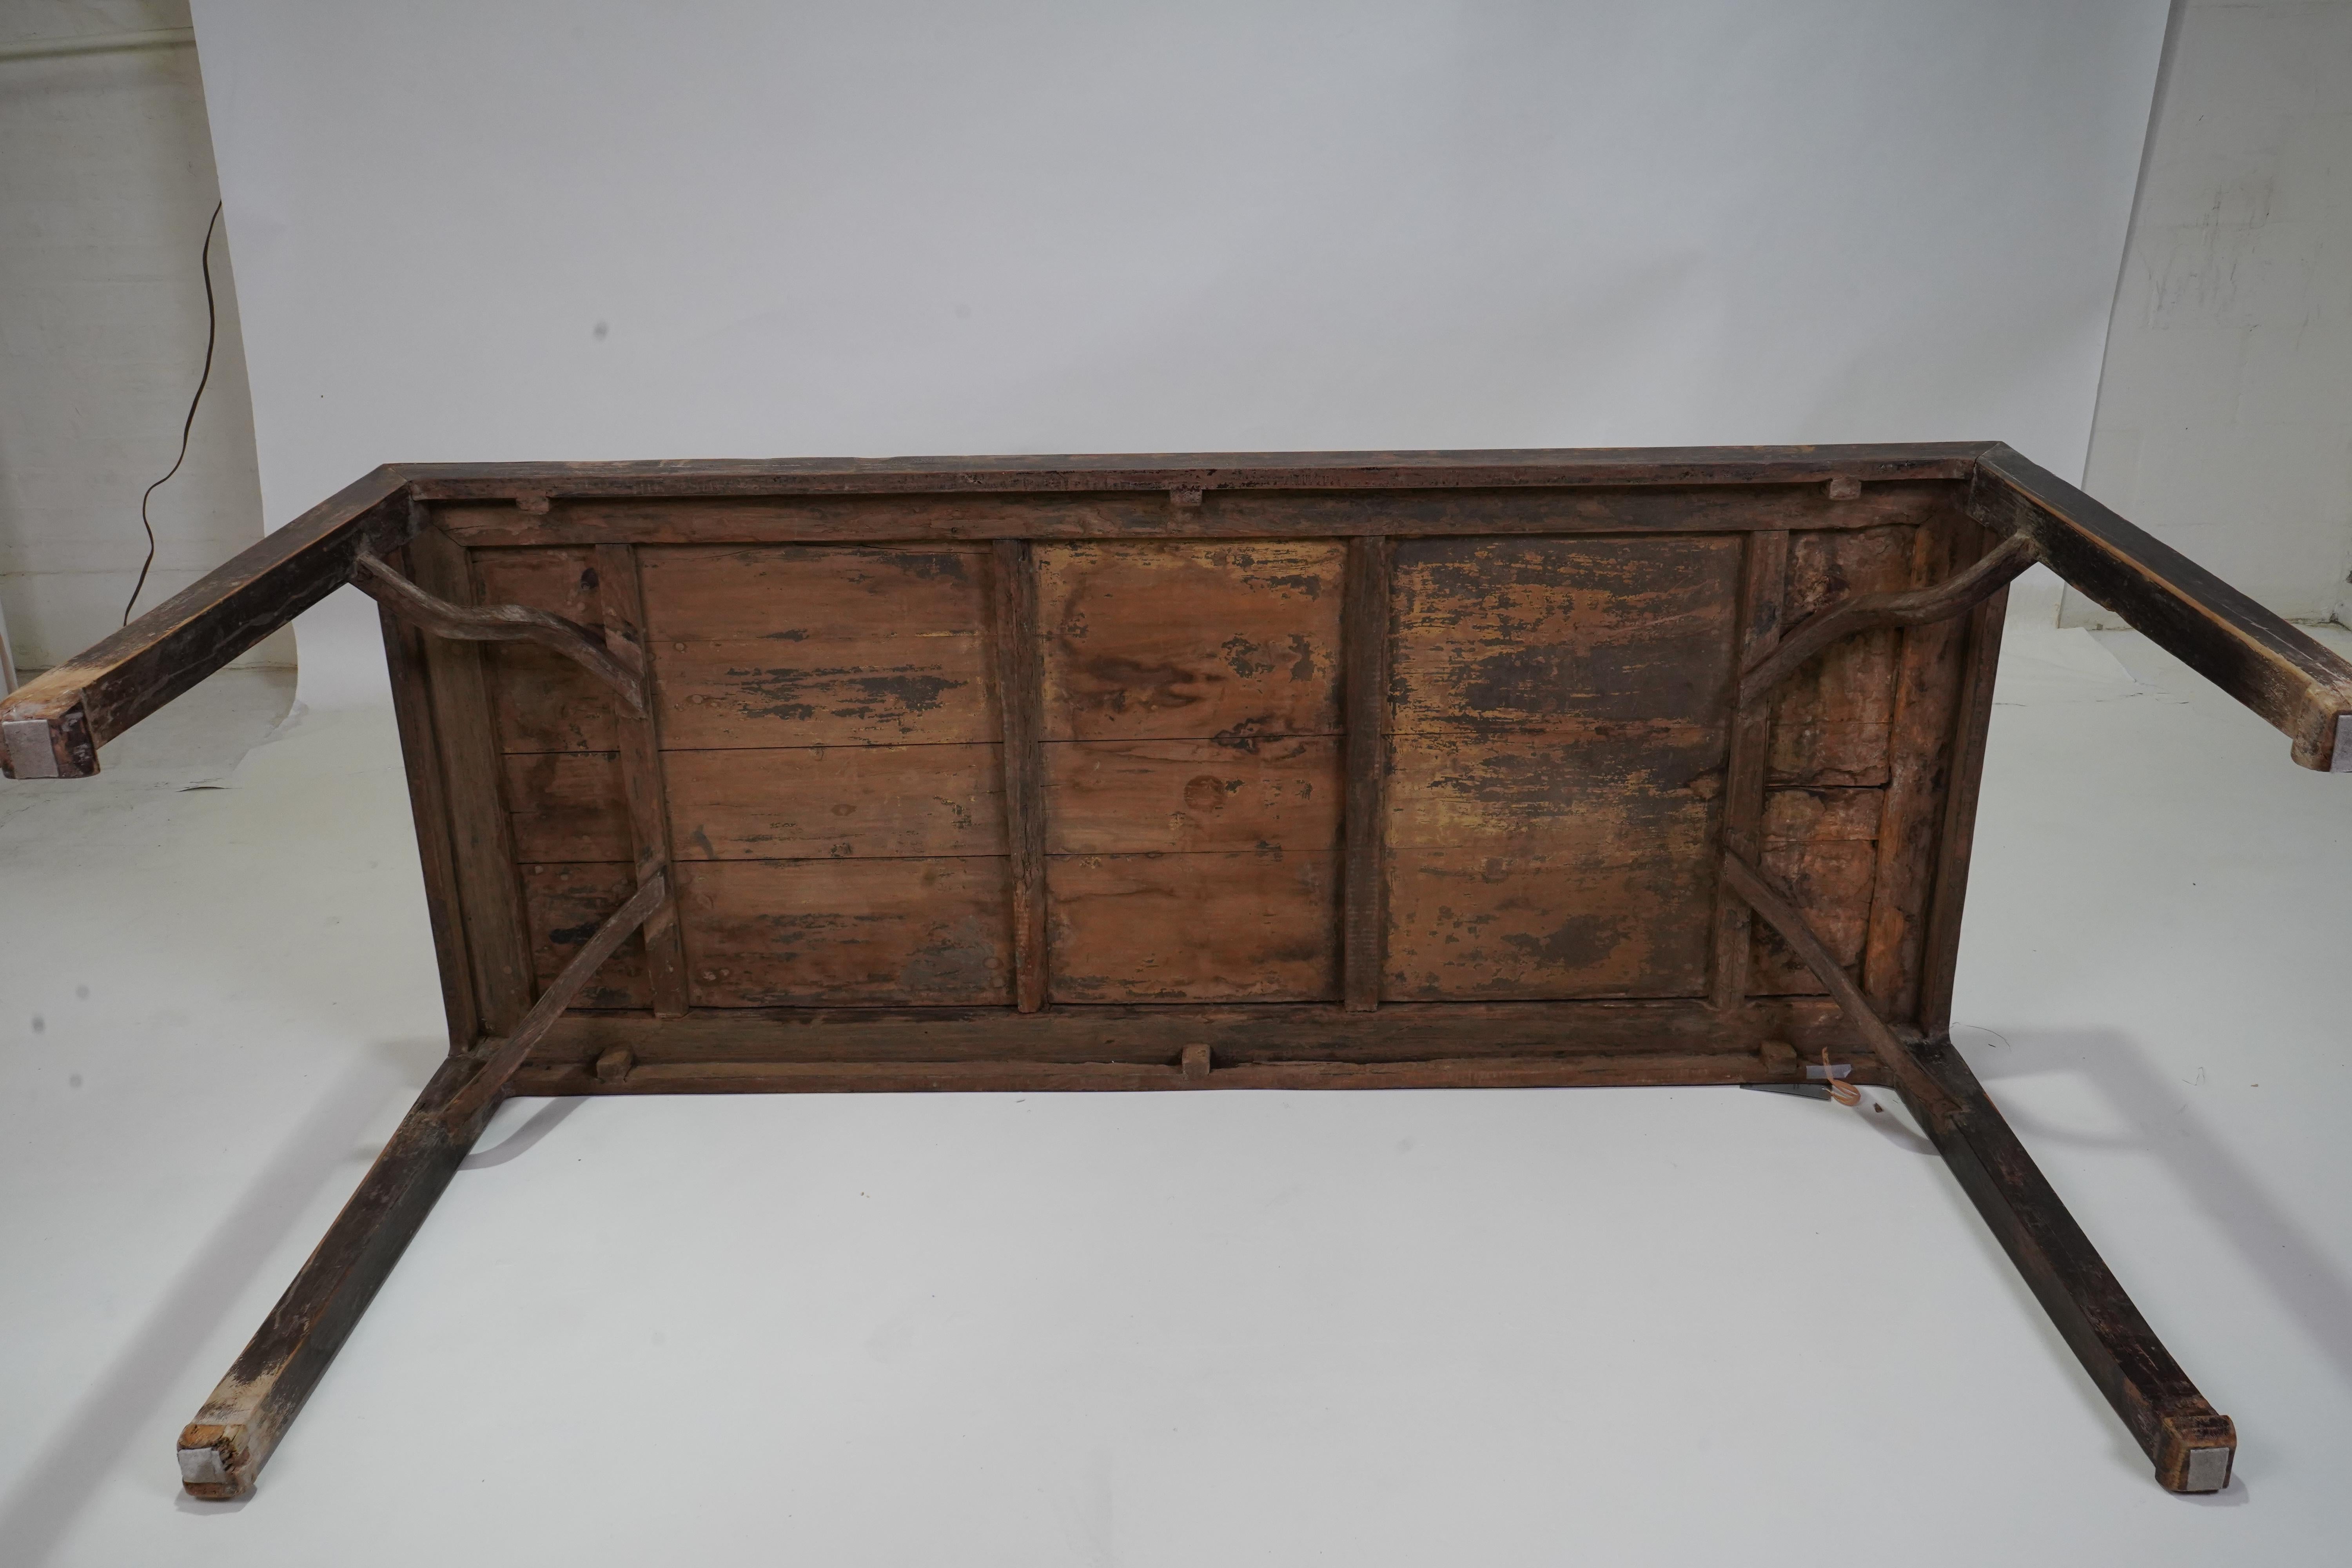 C. 1850 Ming Style Chinese Painting Table with Horse Hoof Legs For Sale 7